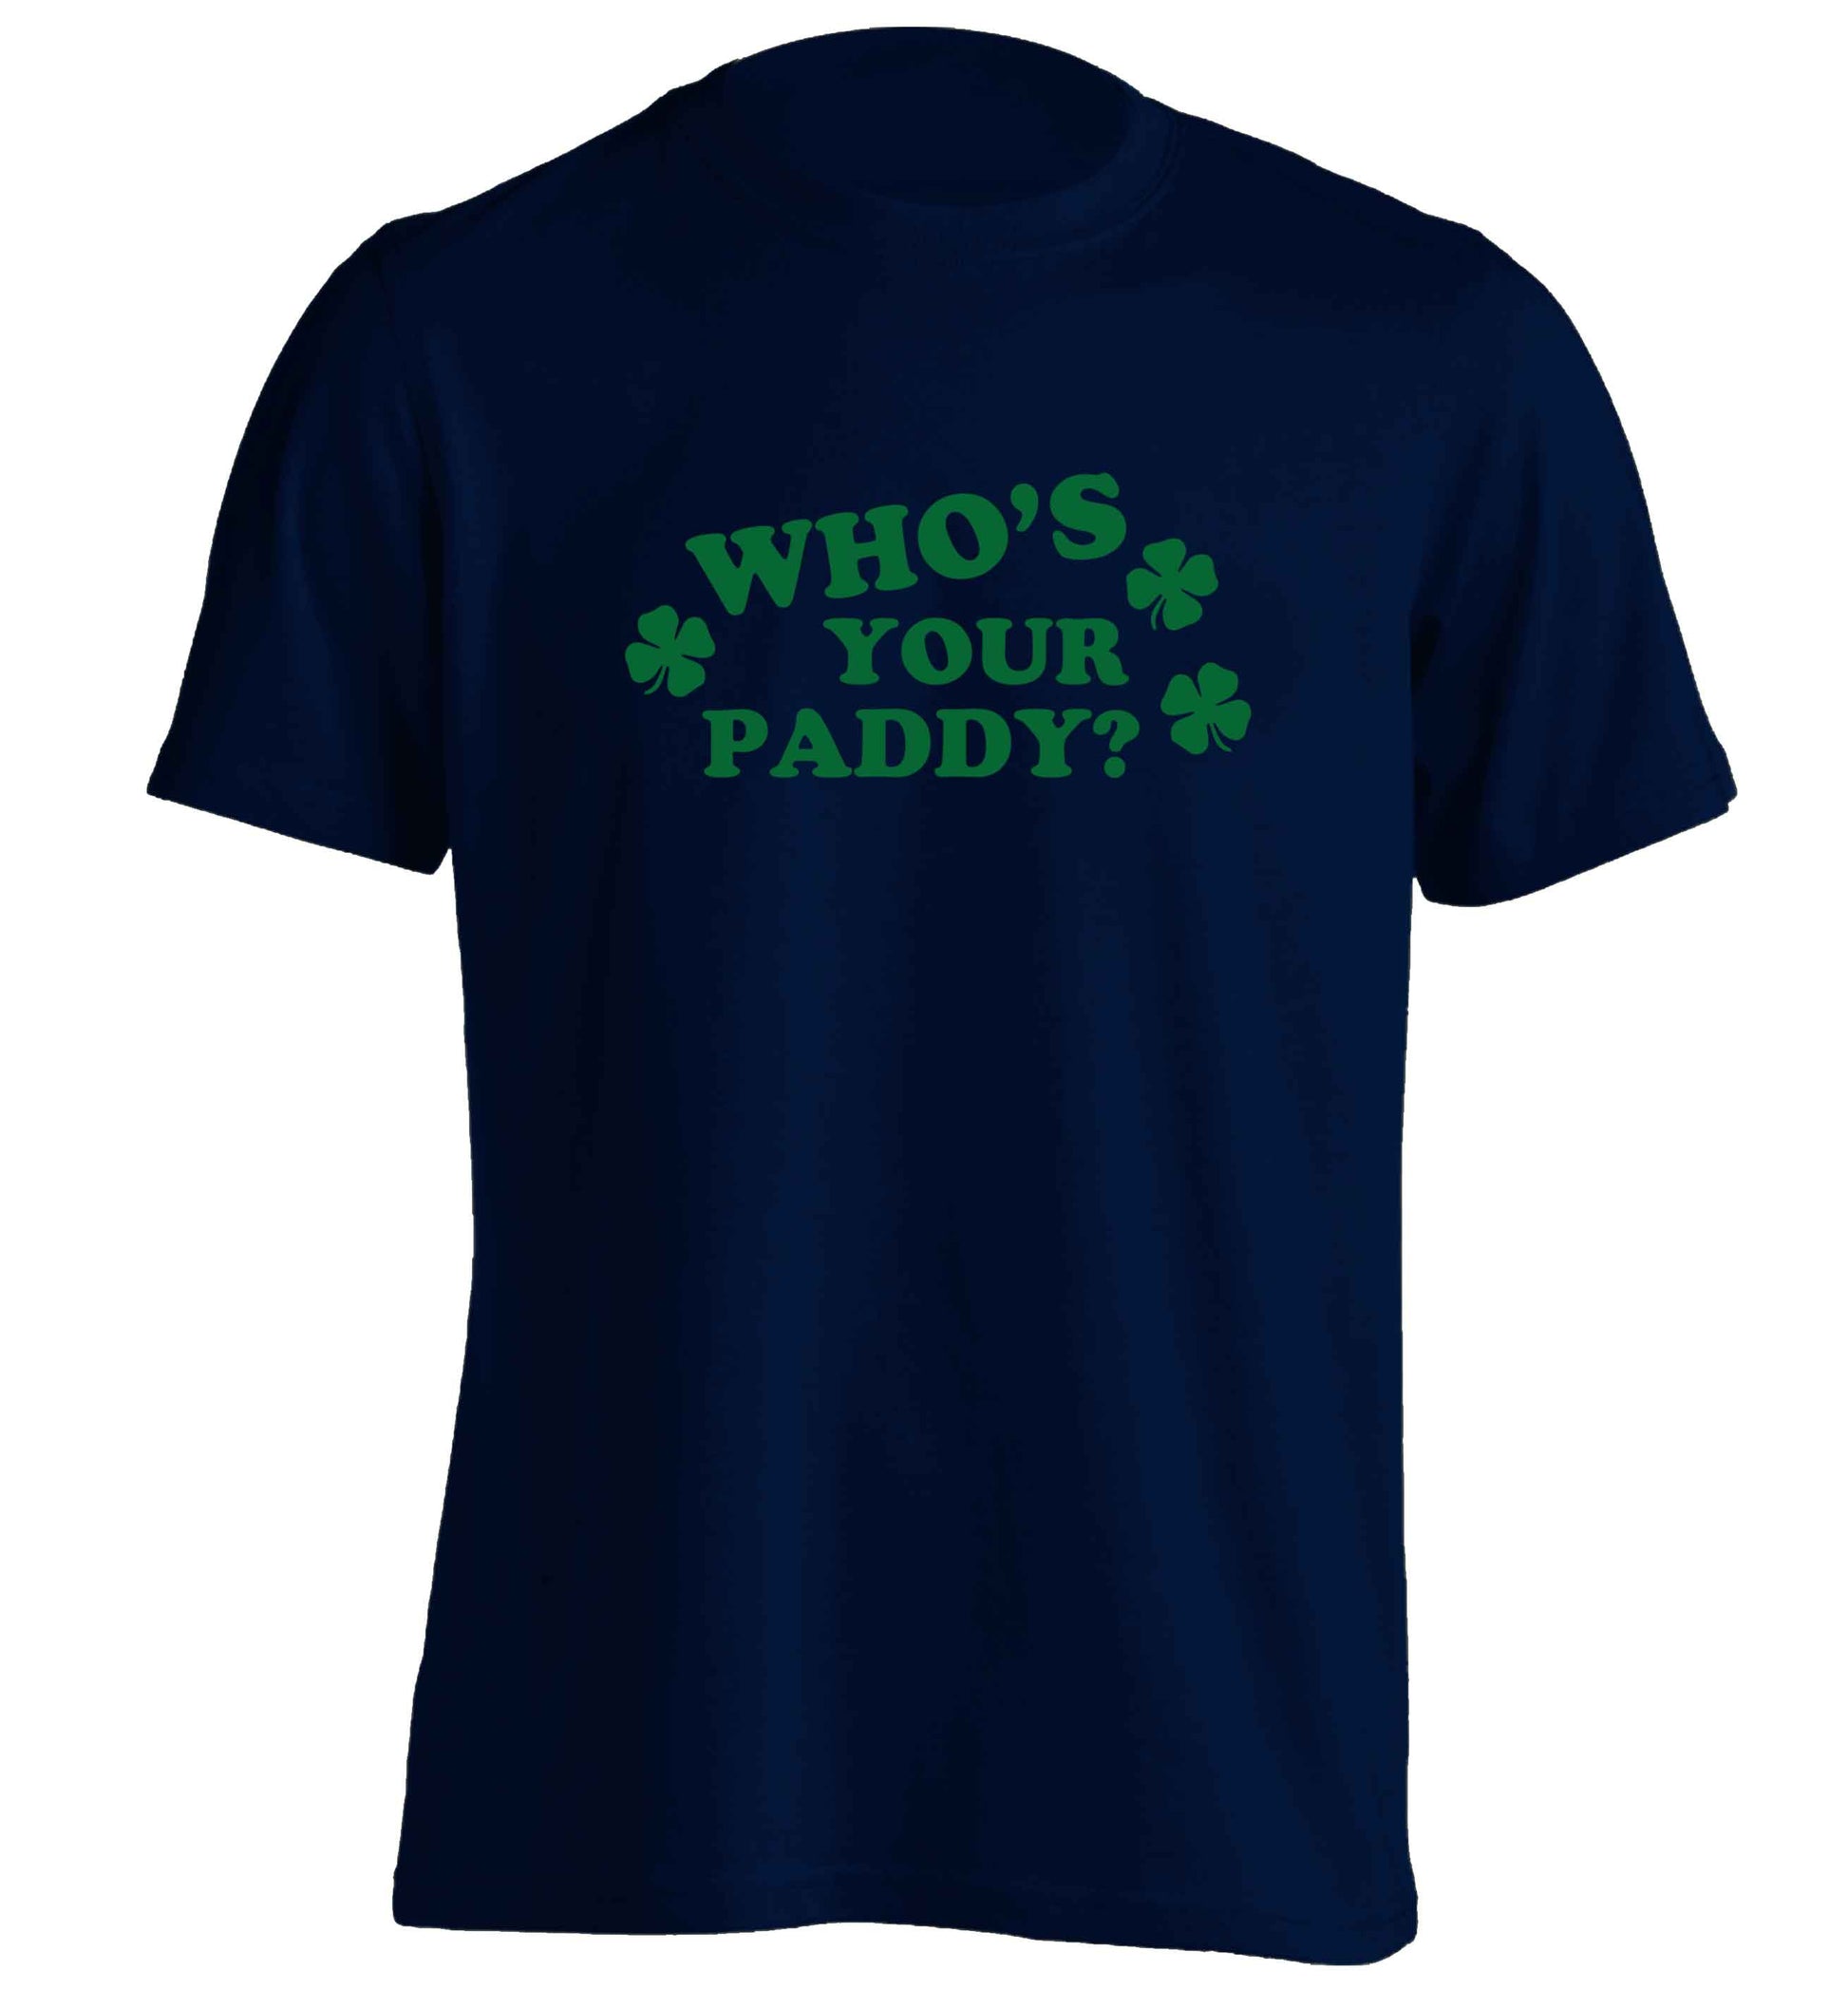 Who's your paddy? adults unisex navy Tshirt 2XL